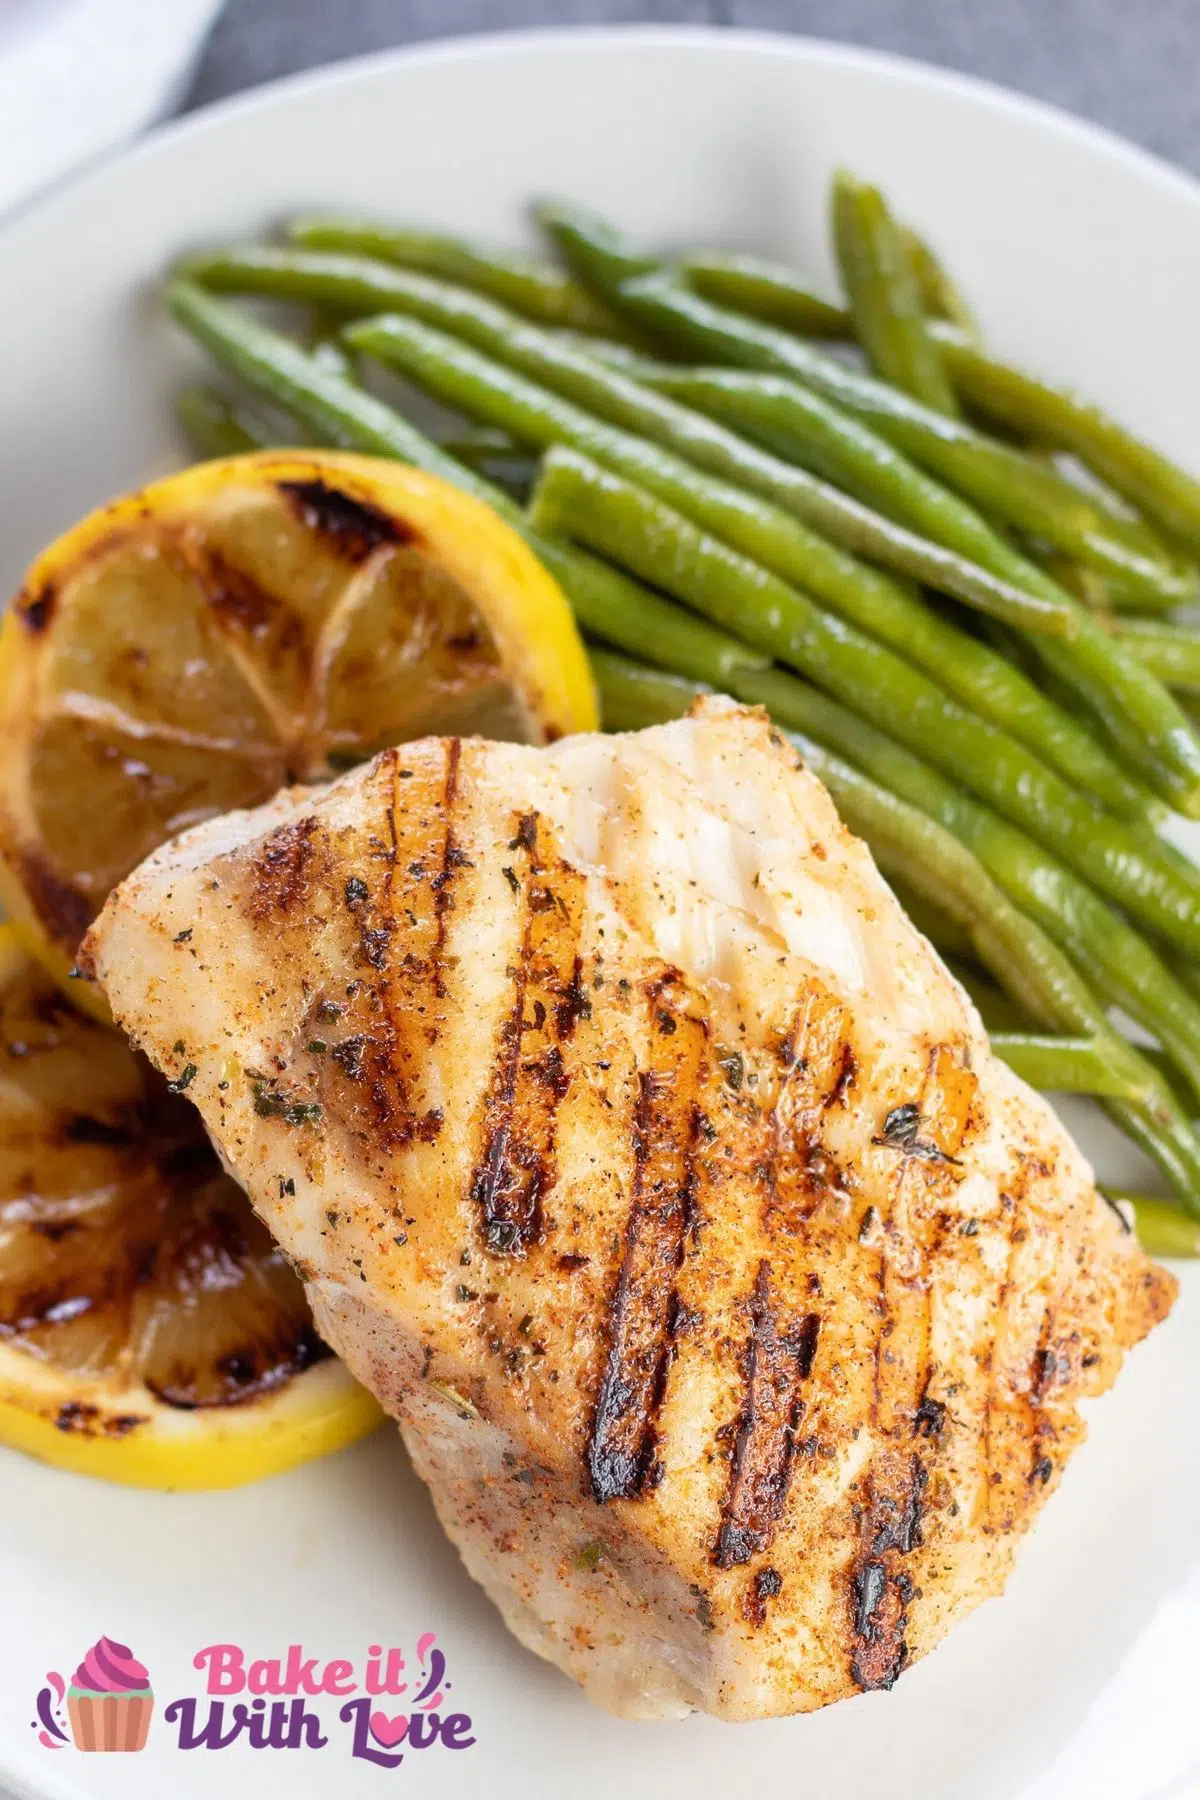 Tall image of grilled grouper fish on a white plate with lemons and green beans.